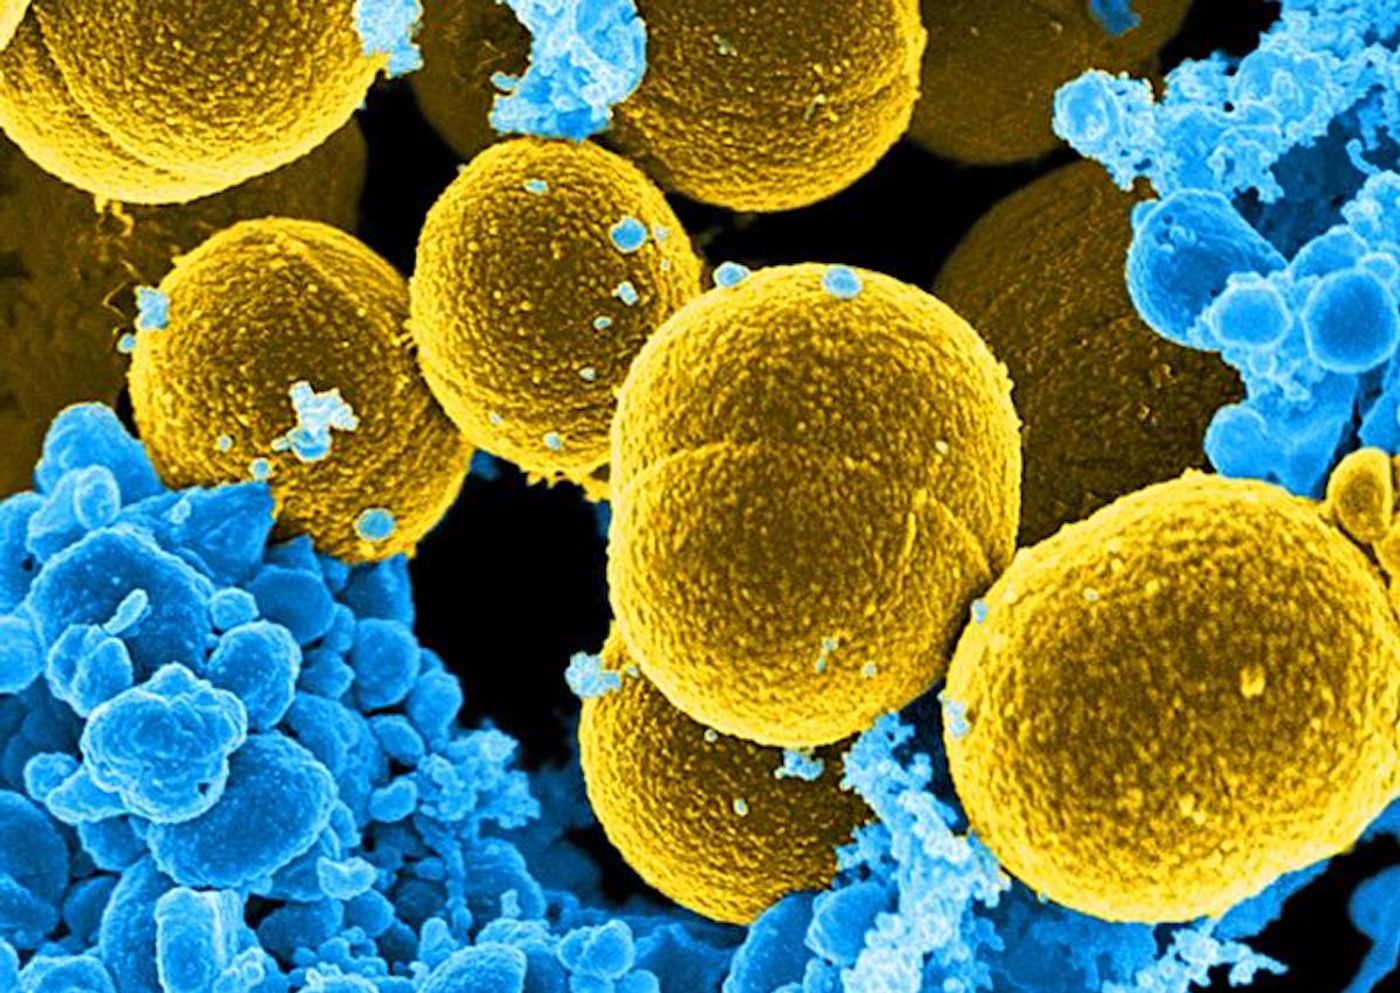 A (cropped) 20,000X magnification of a digitally colorized SEM image of Staphylococcus aureus bacteria (yellow) in the process of attempting to escape destruction by human white blood cells (blue). / Credit: Frank DeLeo, National Institute of Allergy and Infectious Diseases (NIAID)